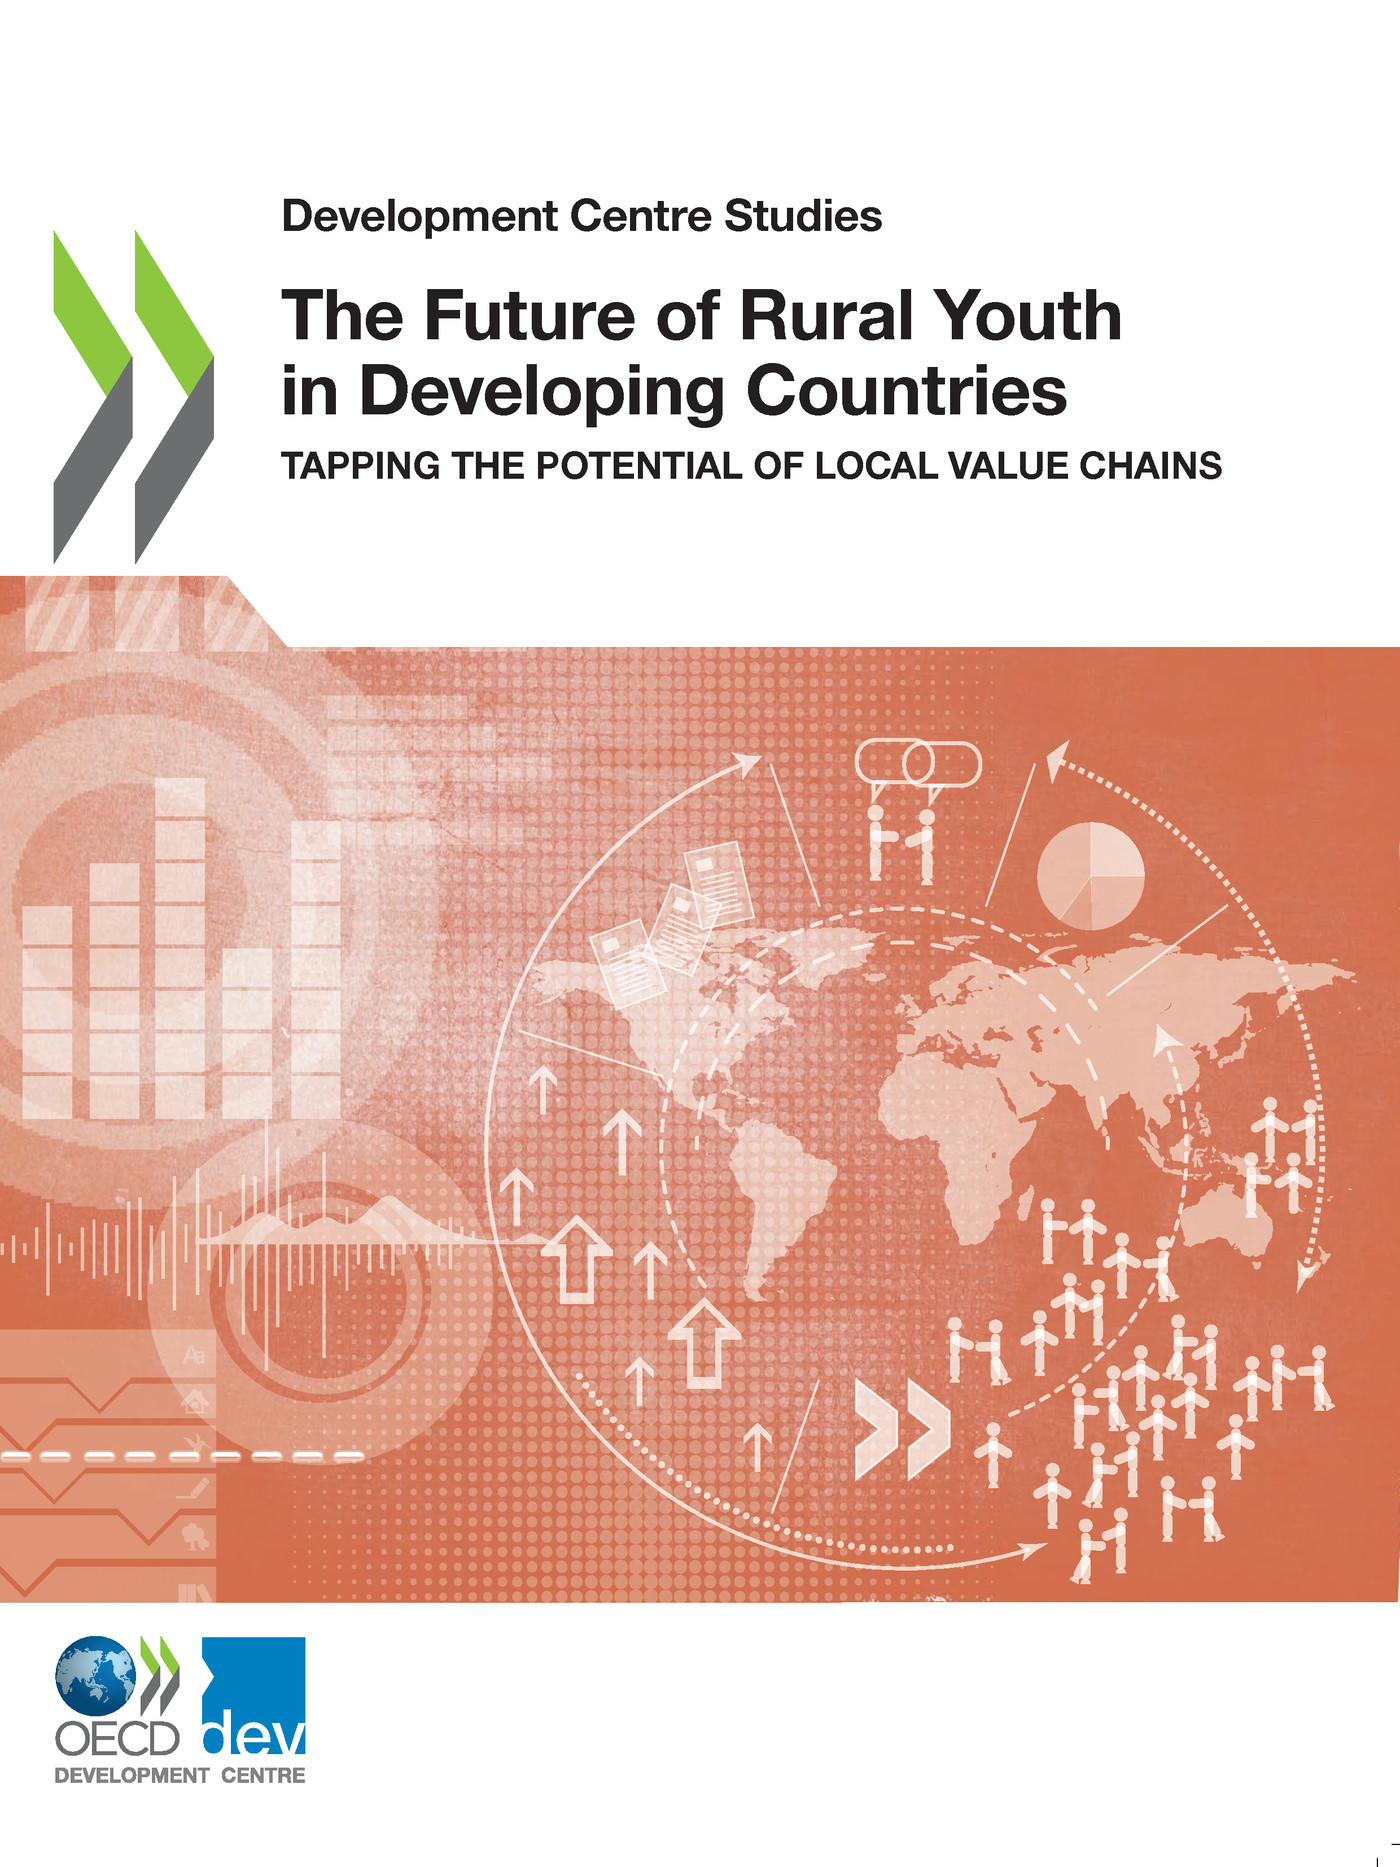 The Future of Rural Youth in Developing Countries -  Collectif - OCDE / OECD